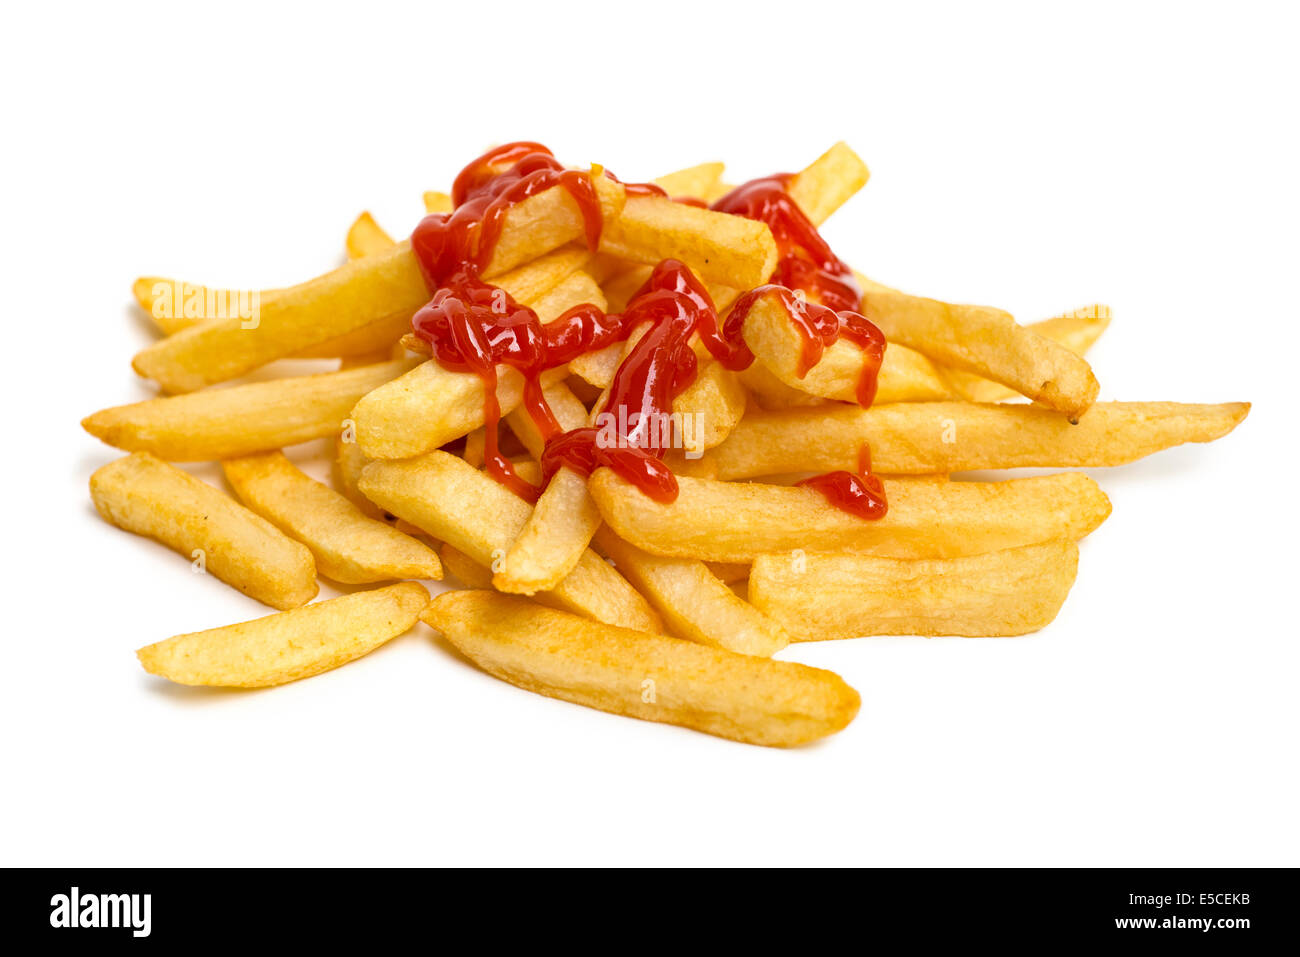 Fries, patate fritte con ketchup, salsa di catsup Foto Stock